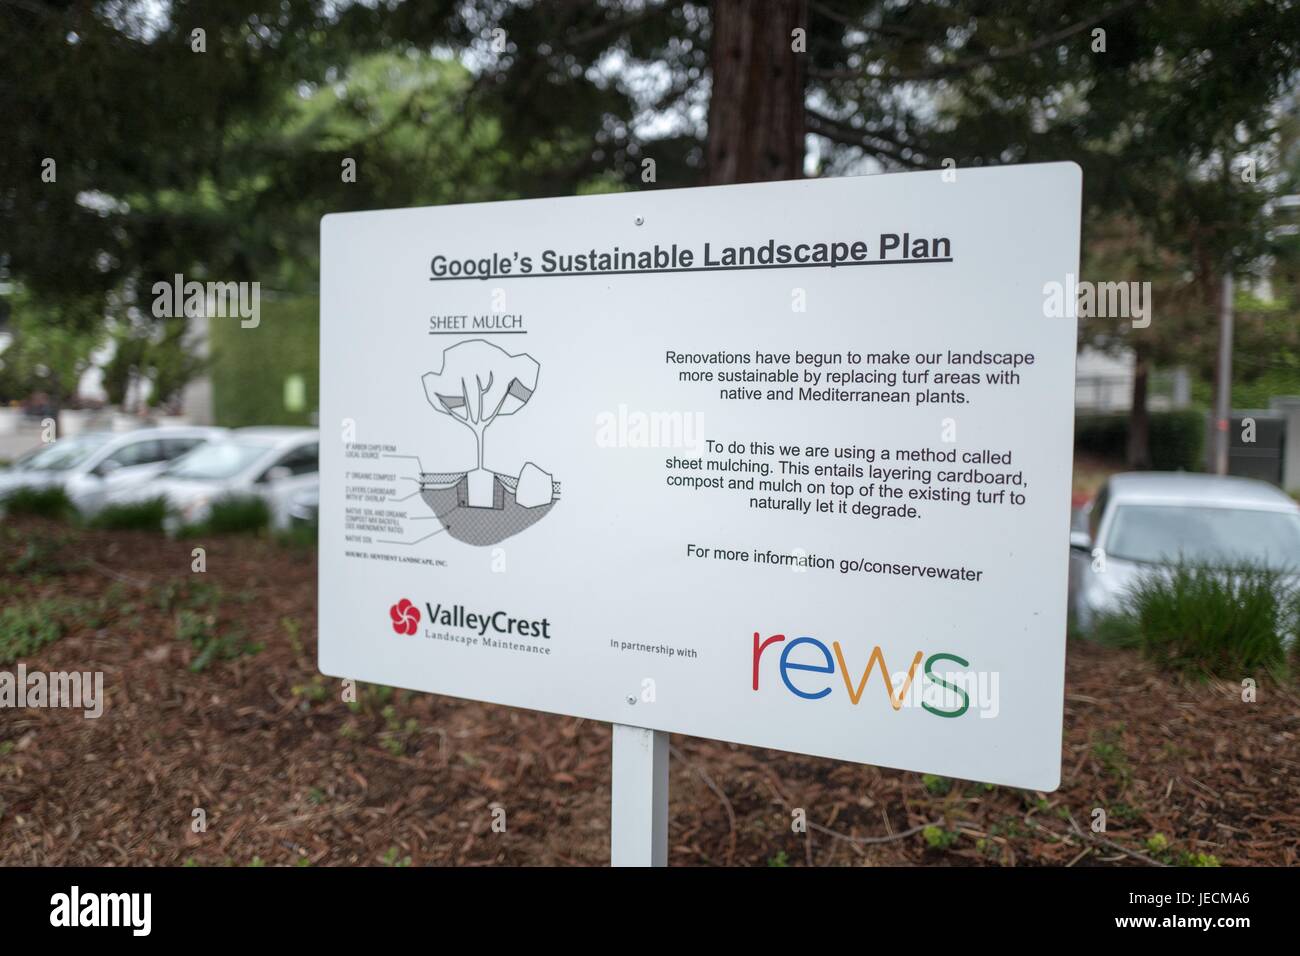 Signage for the Google Sustainable Landscape Plan at the Googleplex, headquarters of Google Inc in the Silicon Valley town of Mountain View, California, April 7, 2017. Stock Photo